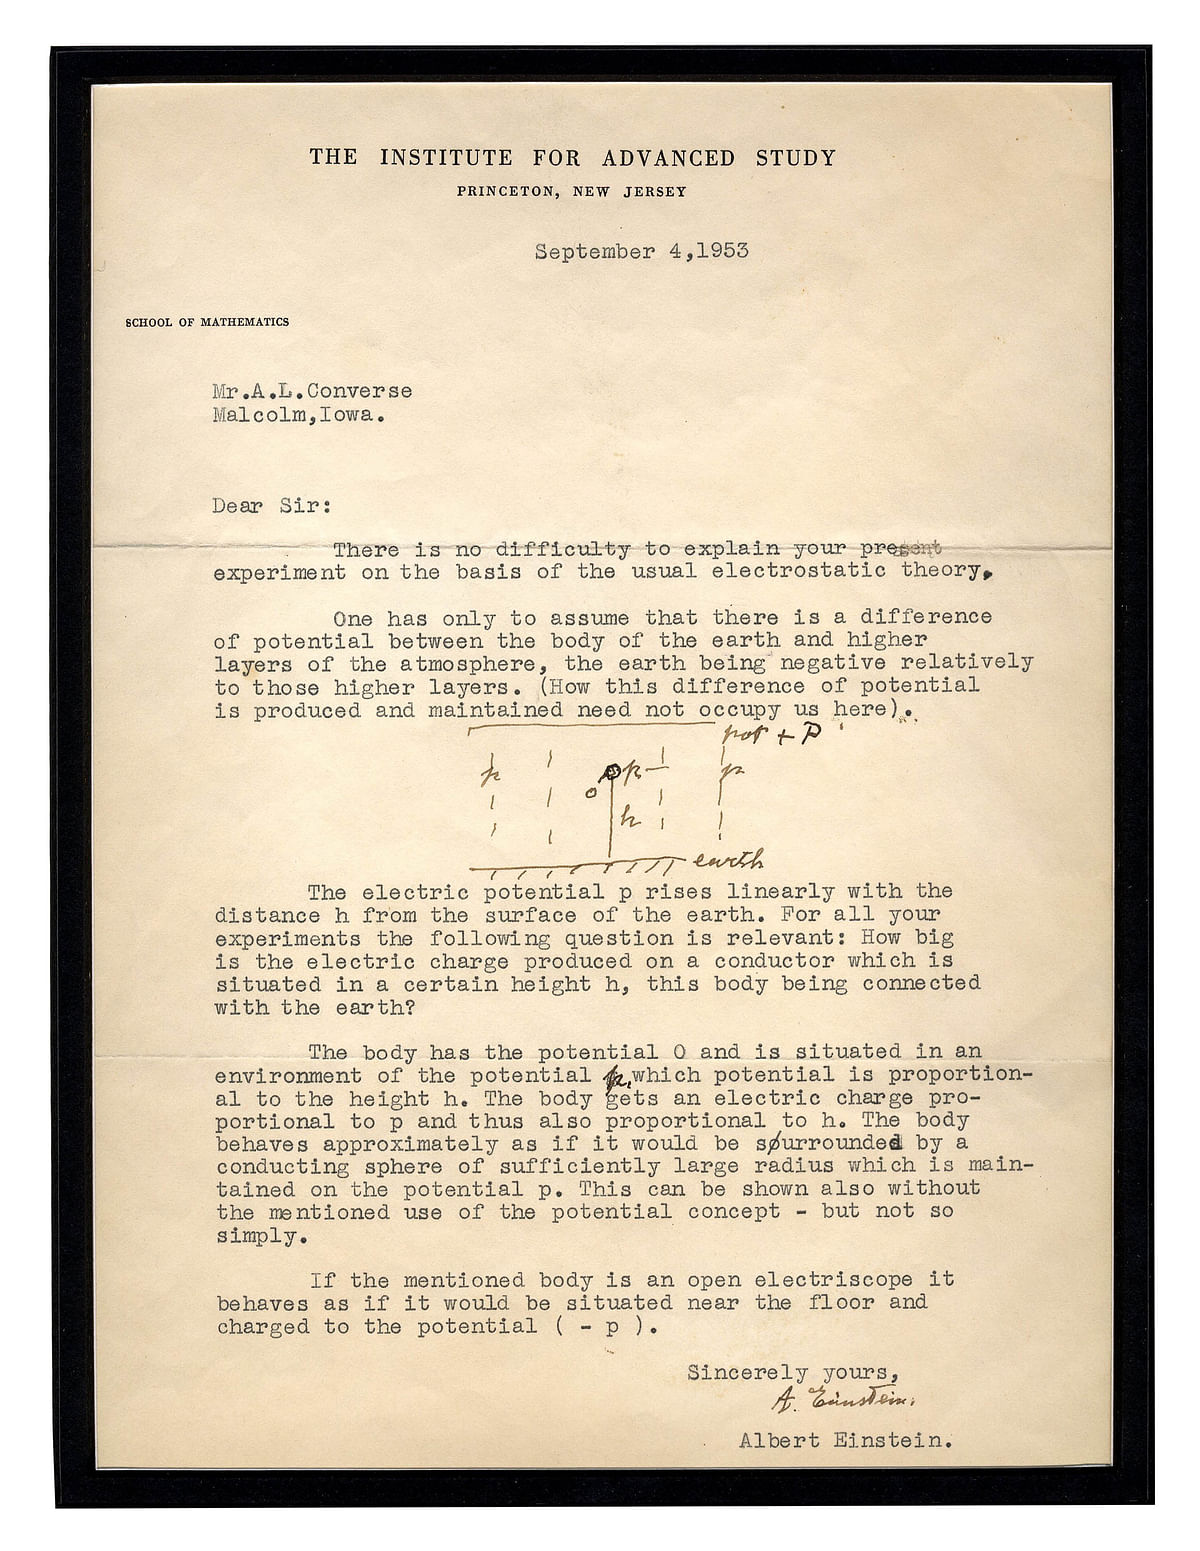 Einstein penned the letter in reply to a two-page questionnaire sent by Arthur Converse, a science teacher.